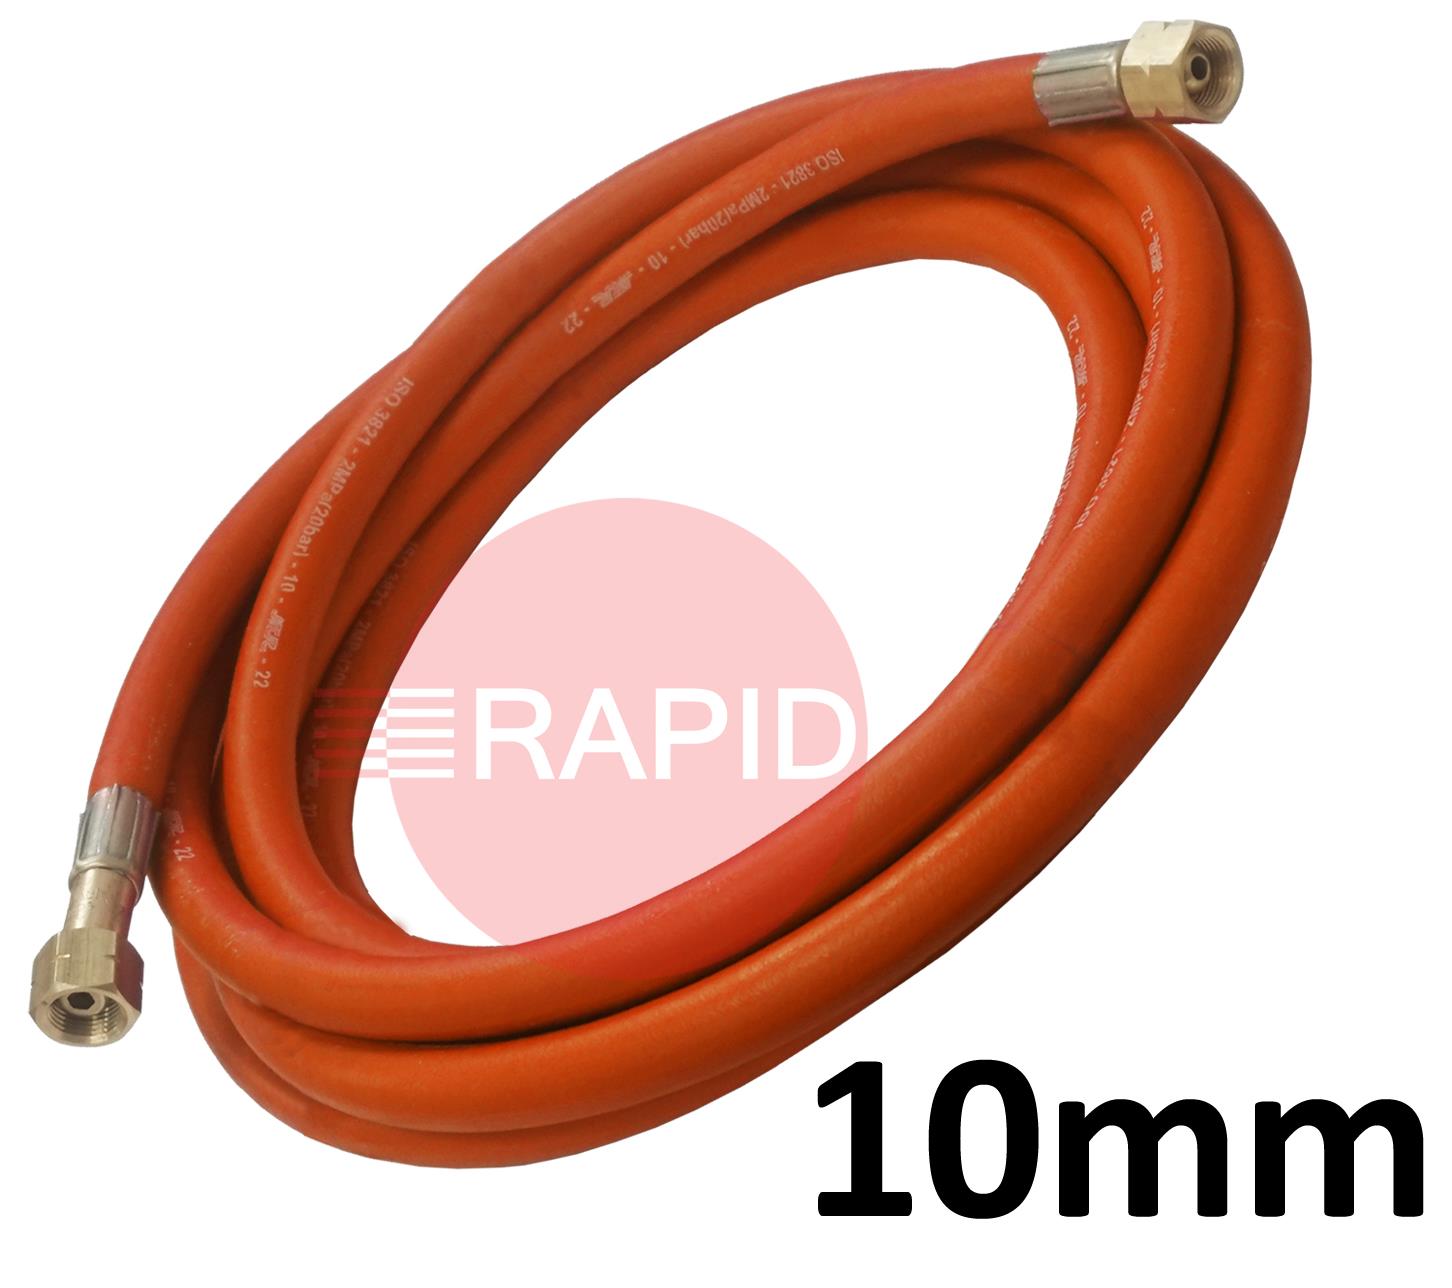 A5134  Fitted Propane Hose. 10mm Bore. G3/8 Check Valve & G3/8 Regulator Connection - 20m